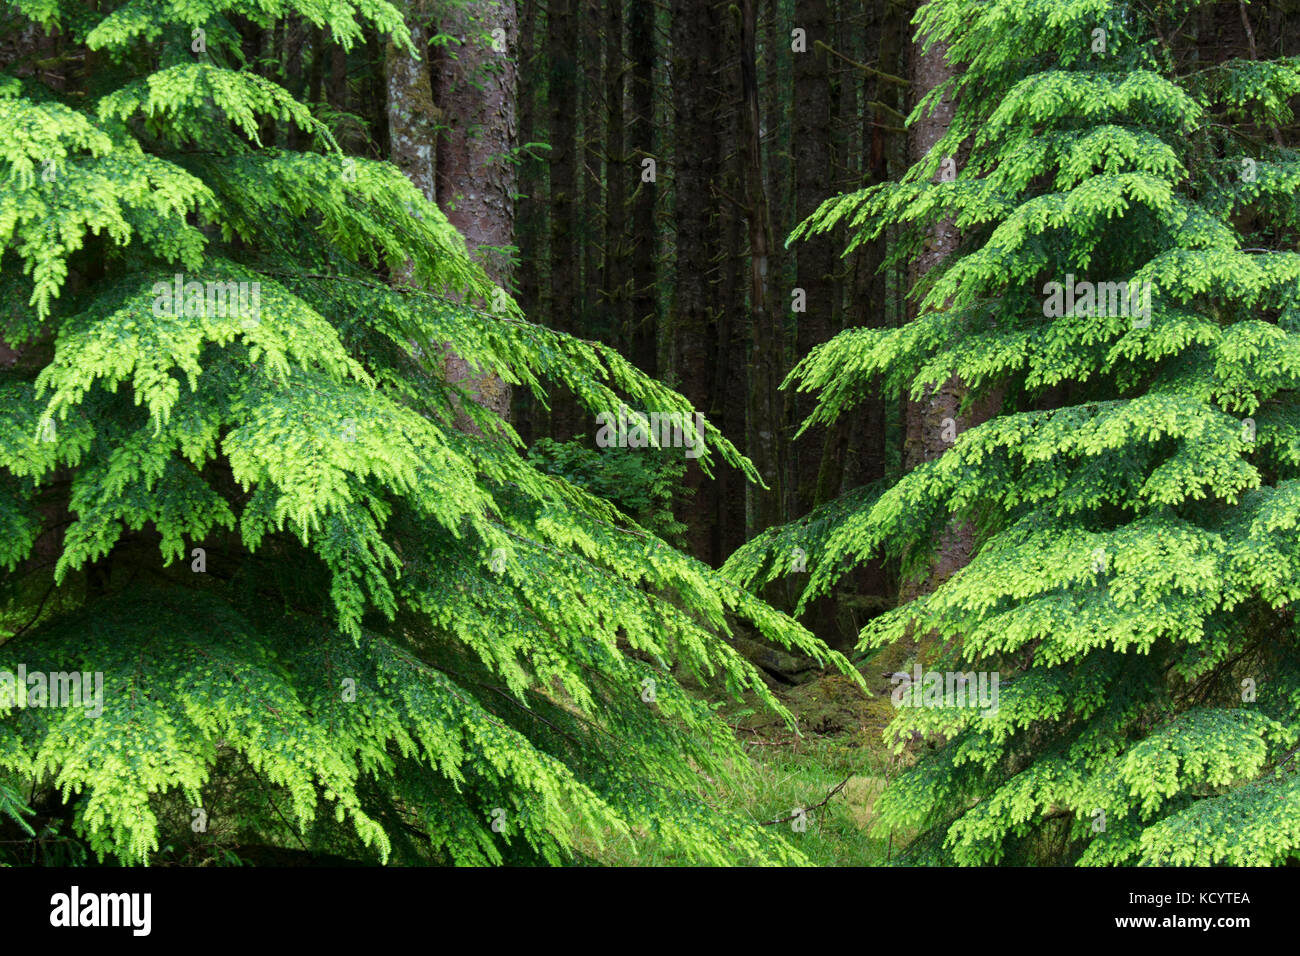 Flushing hemlock trees in spring, Haida Gwaii, formerly known as Queen Charlotte Islands, British Columbia, Canada Stock Photo